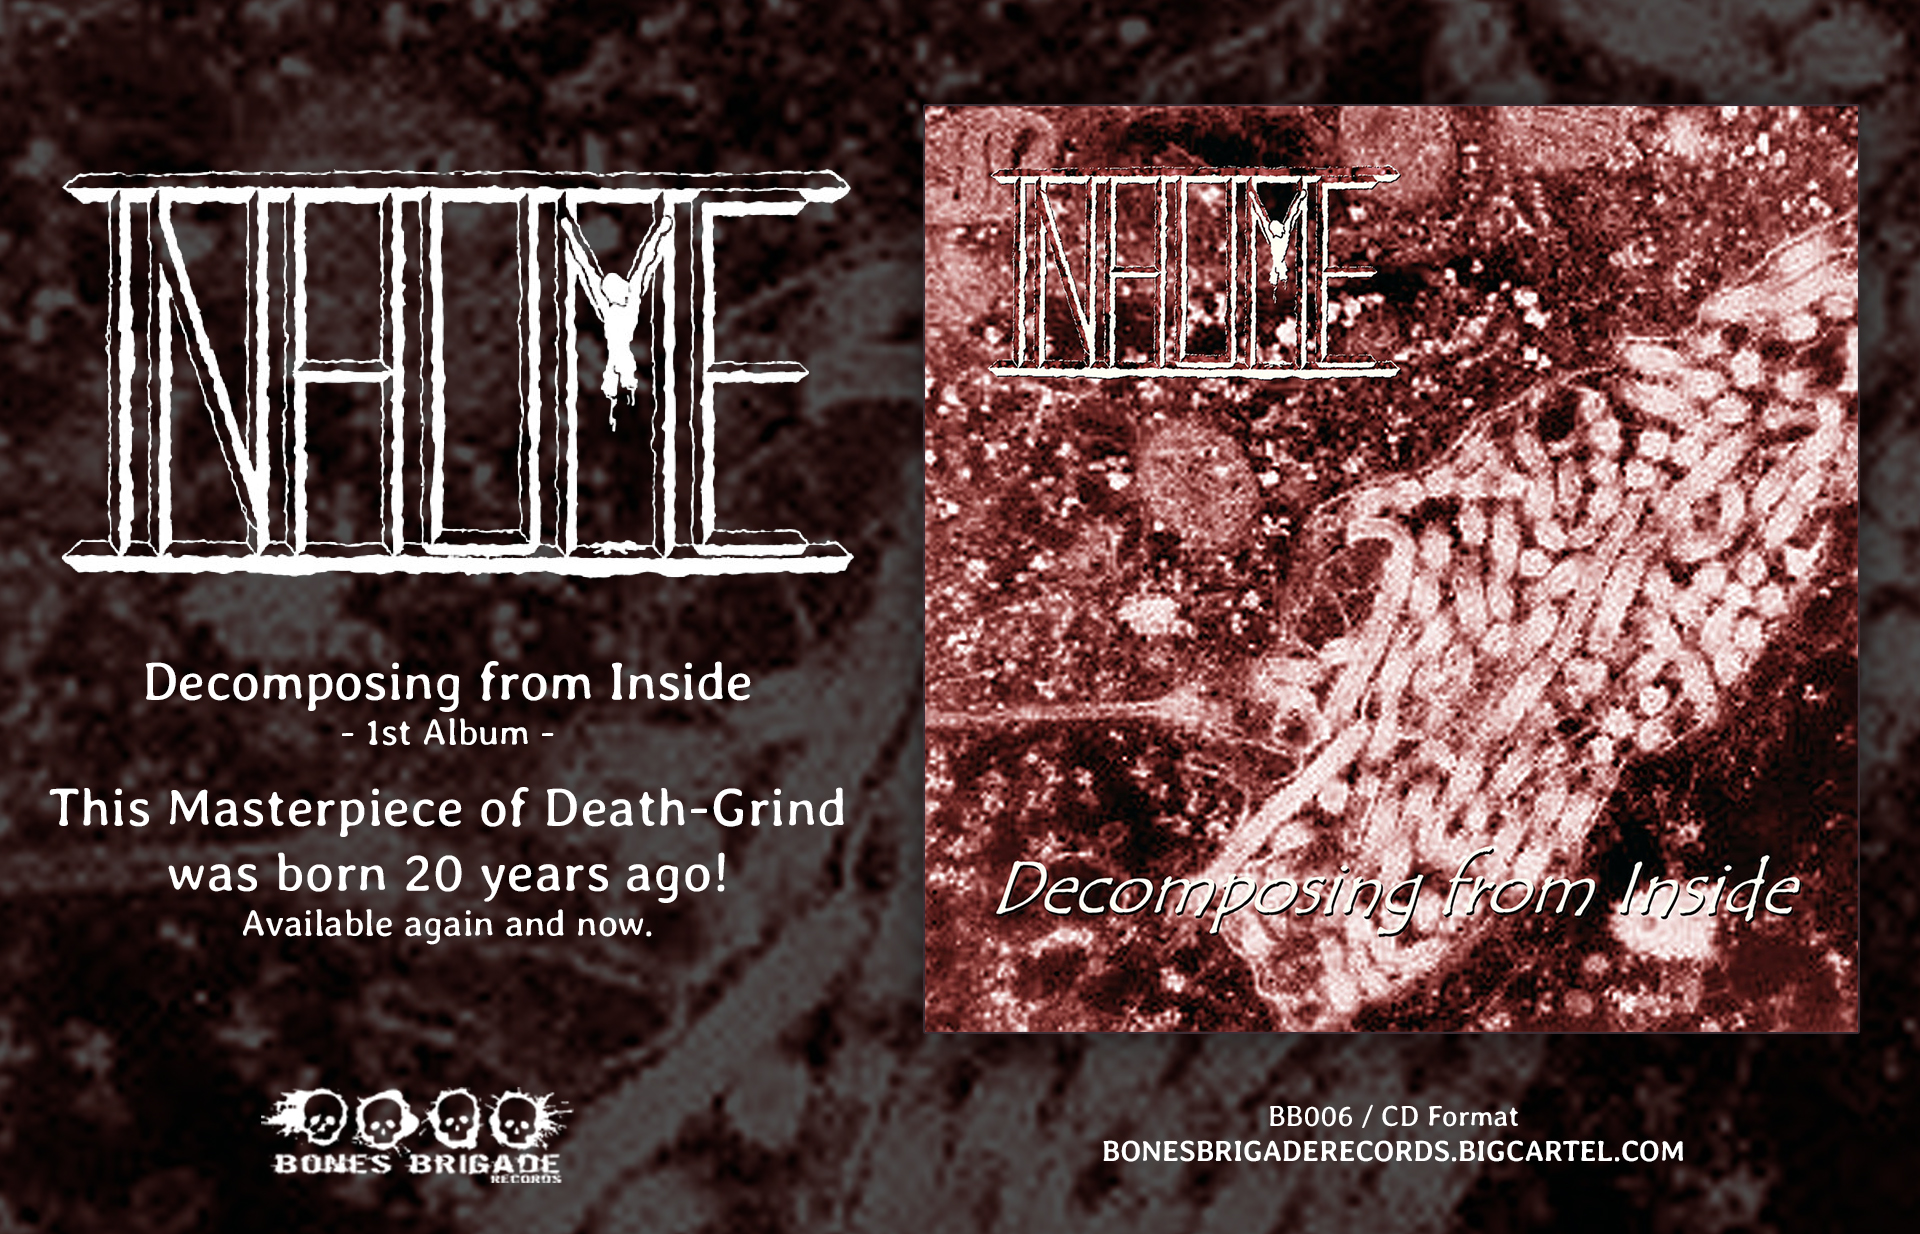 Inhume - Decomposing From Inside - CD Re-issue on Bones Brigade Records